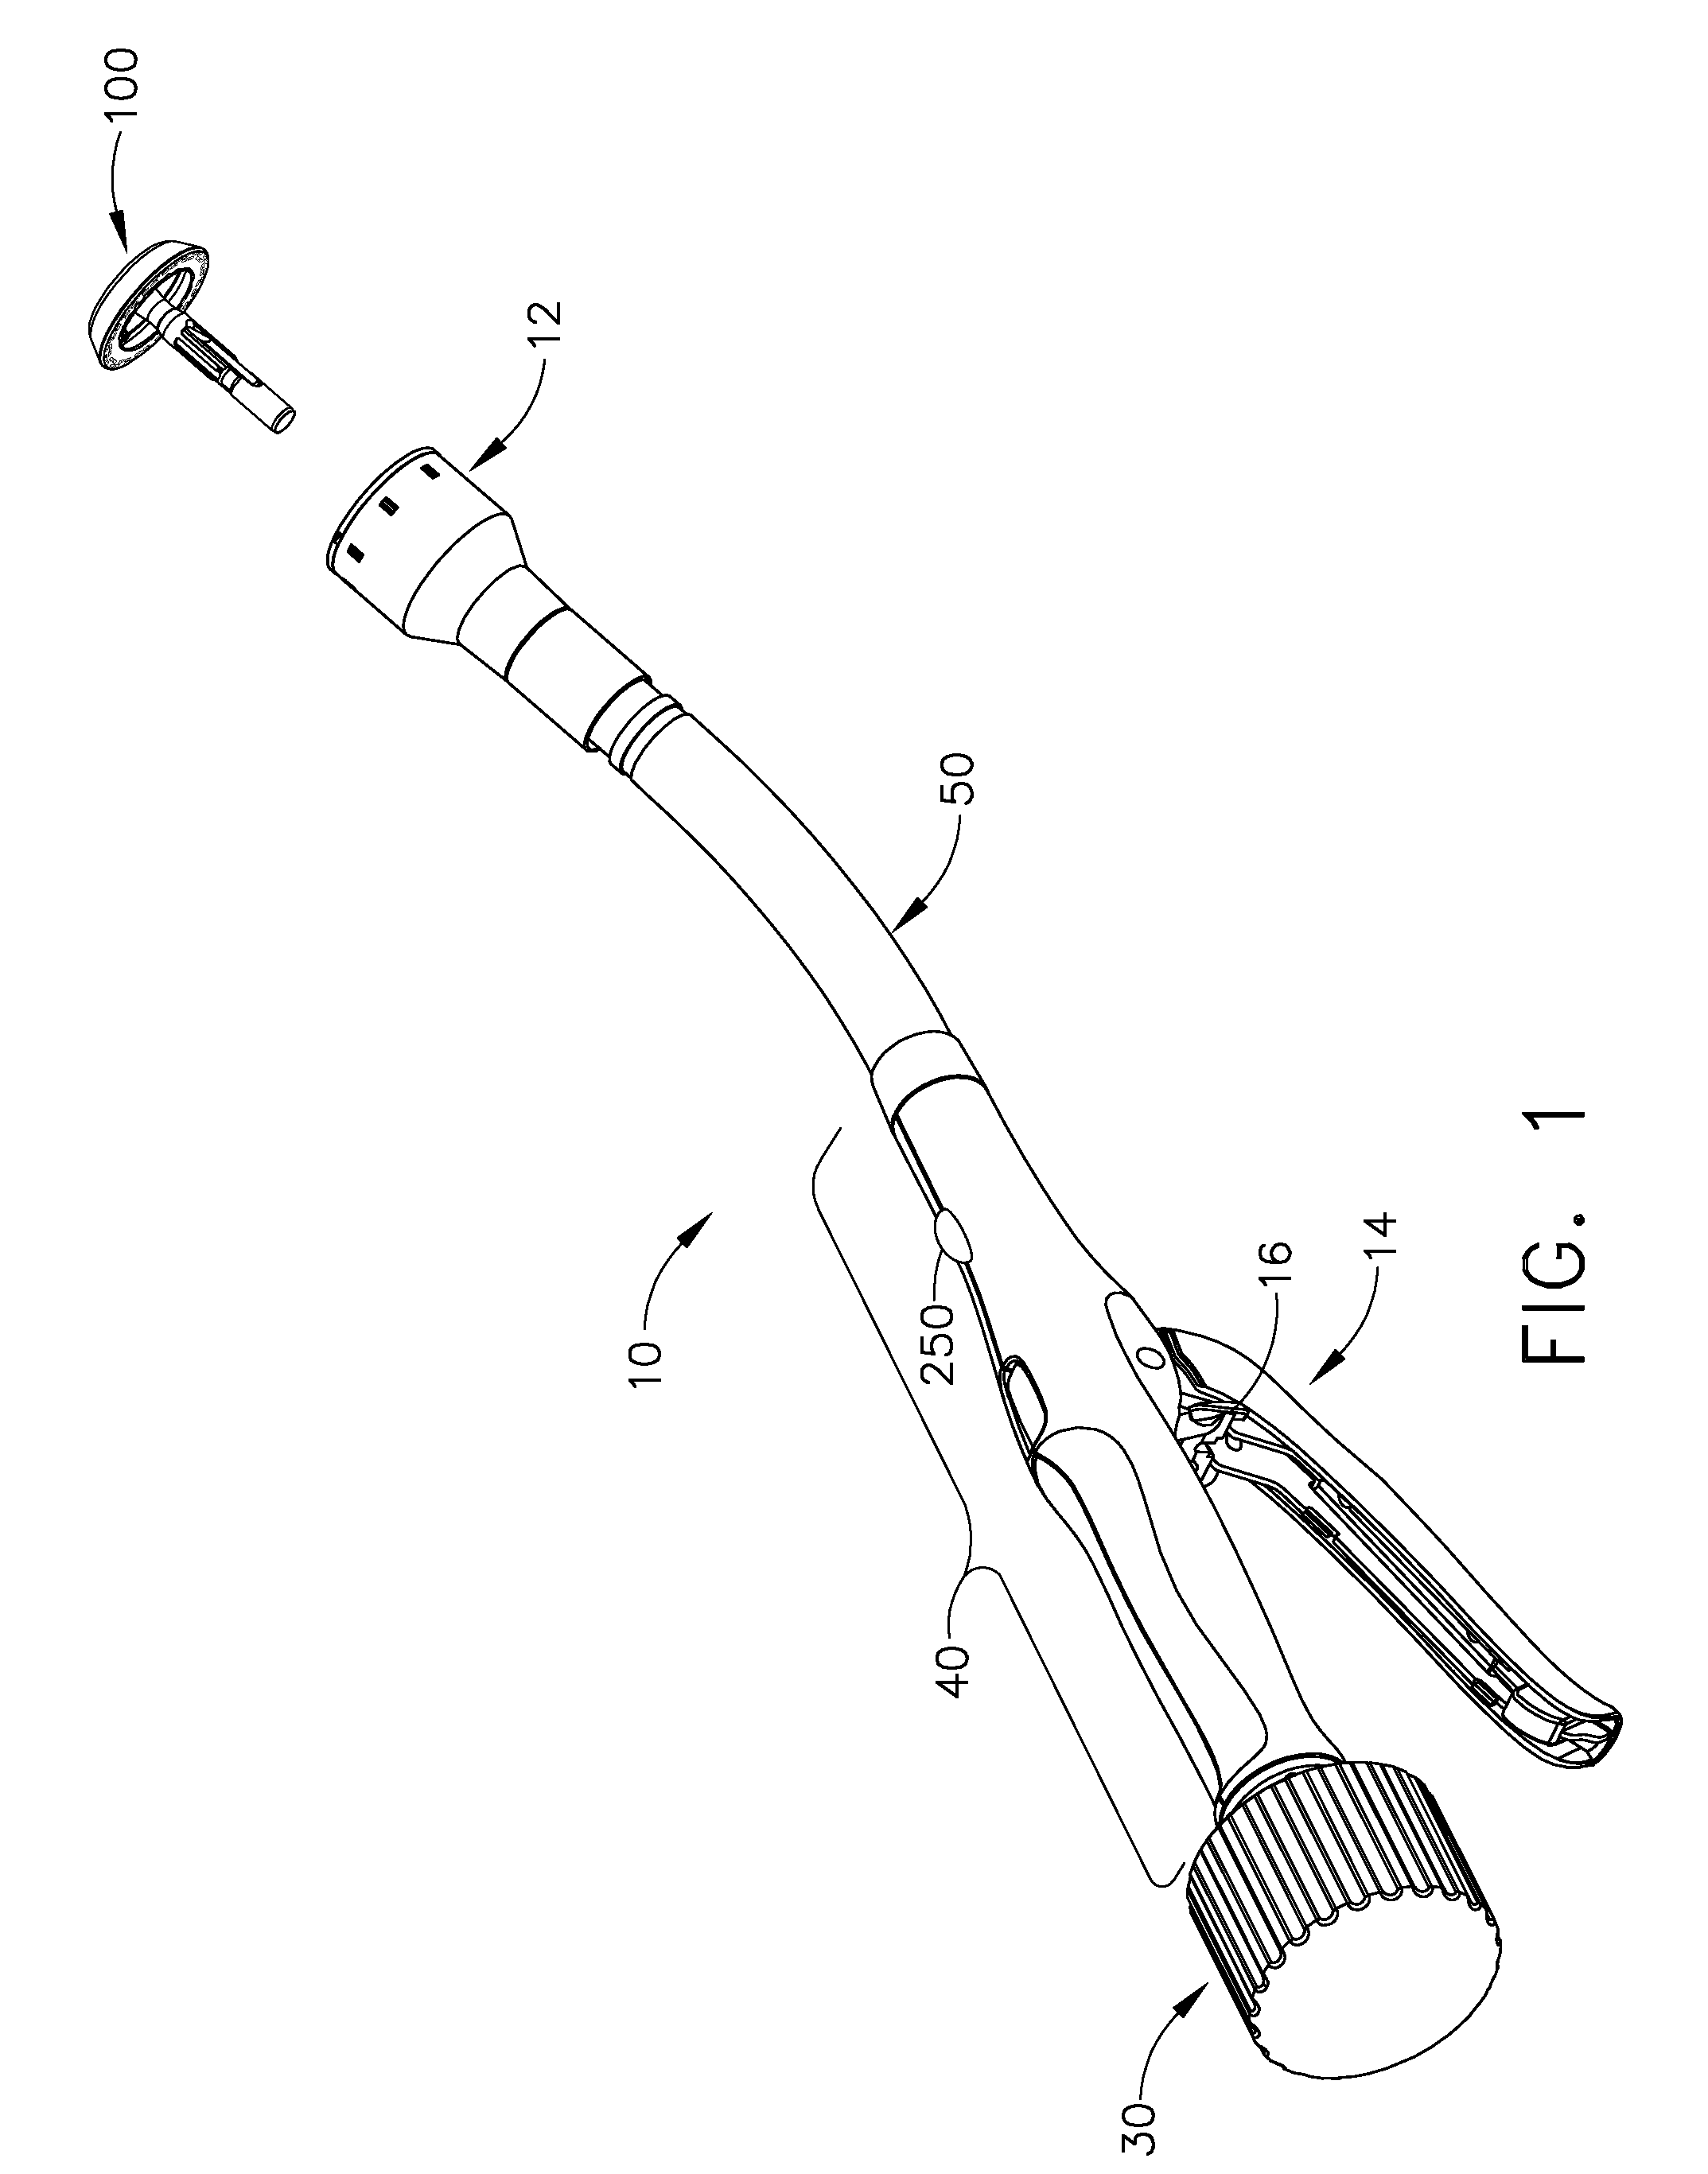 Surgical stapling instrument with device for indicating when the instrument has cut through tissue